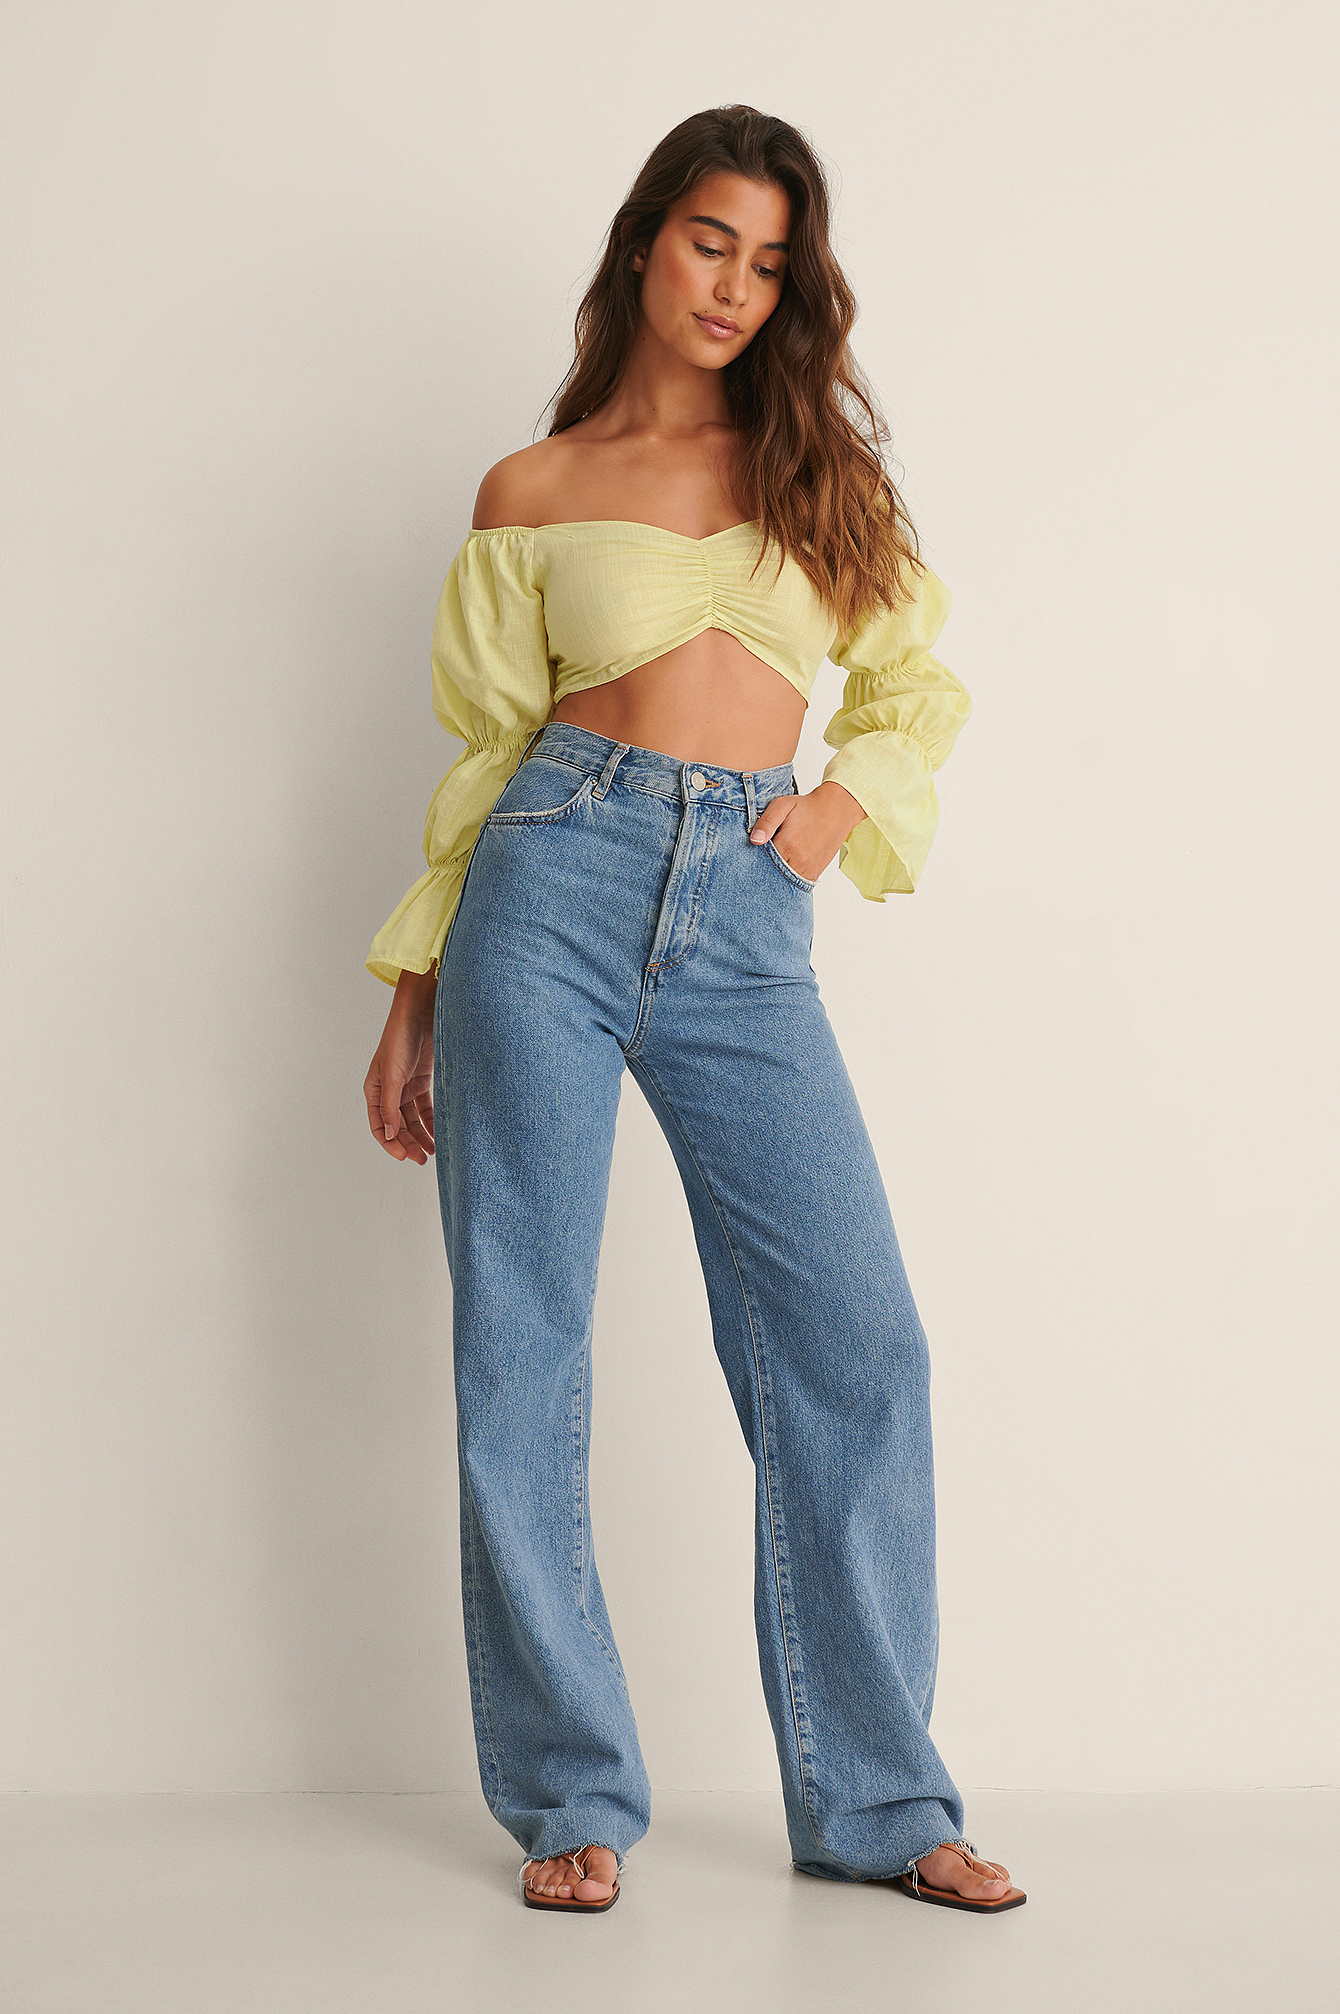 Sleeve Detail Crop Top Outfit